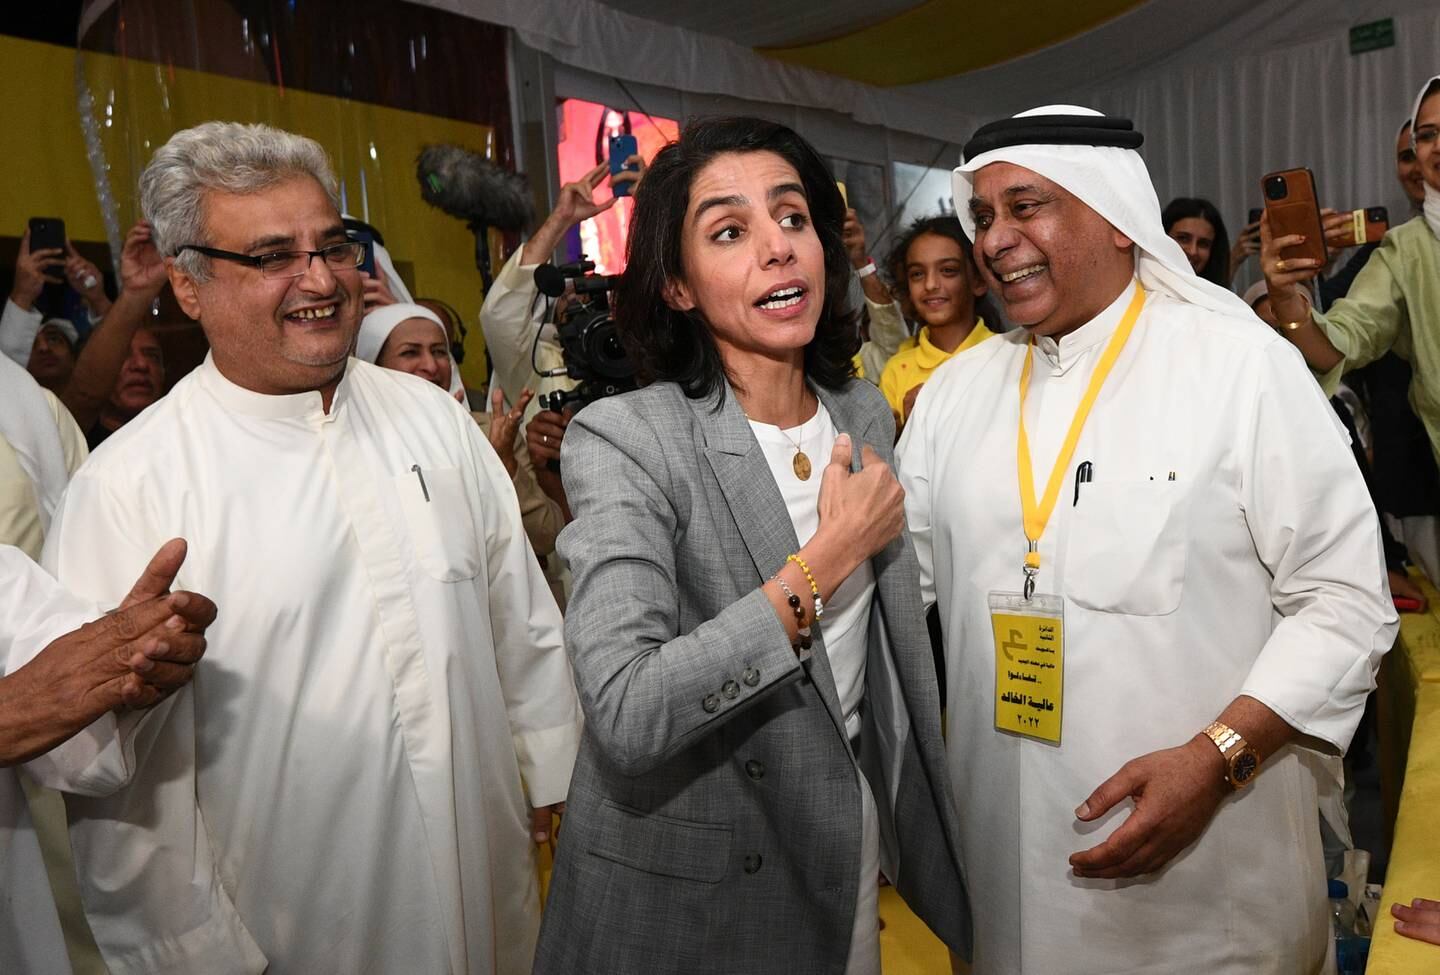 Kuwaiti Candidate Alia AlKhaled (C), celebrates with her supporters after winning in the Kuwaiti parliamentary election in Kuwait City, Kuwait, 30 September 2022. EPA